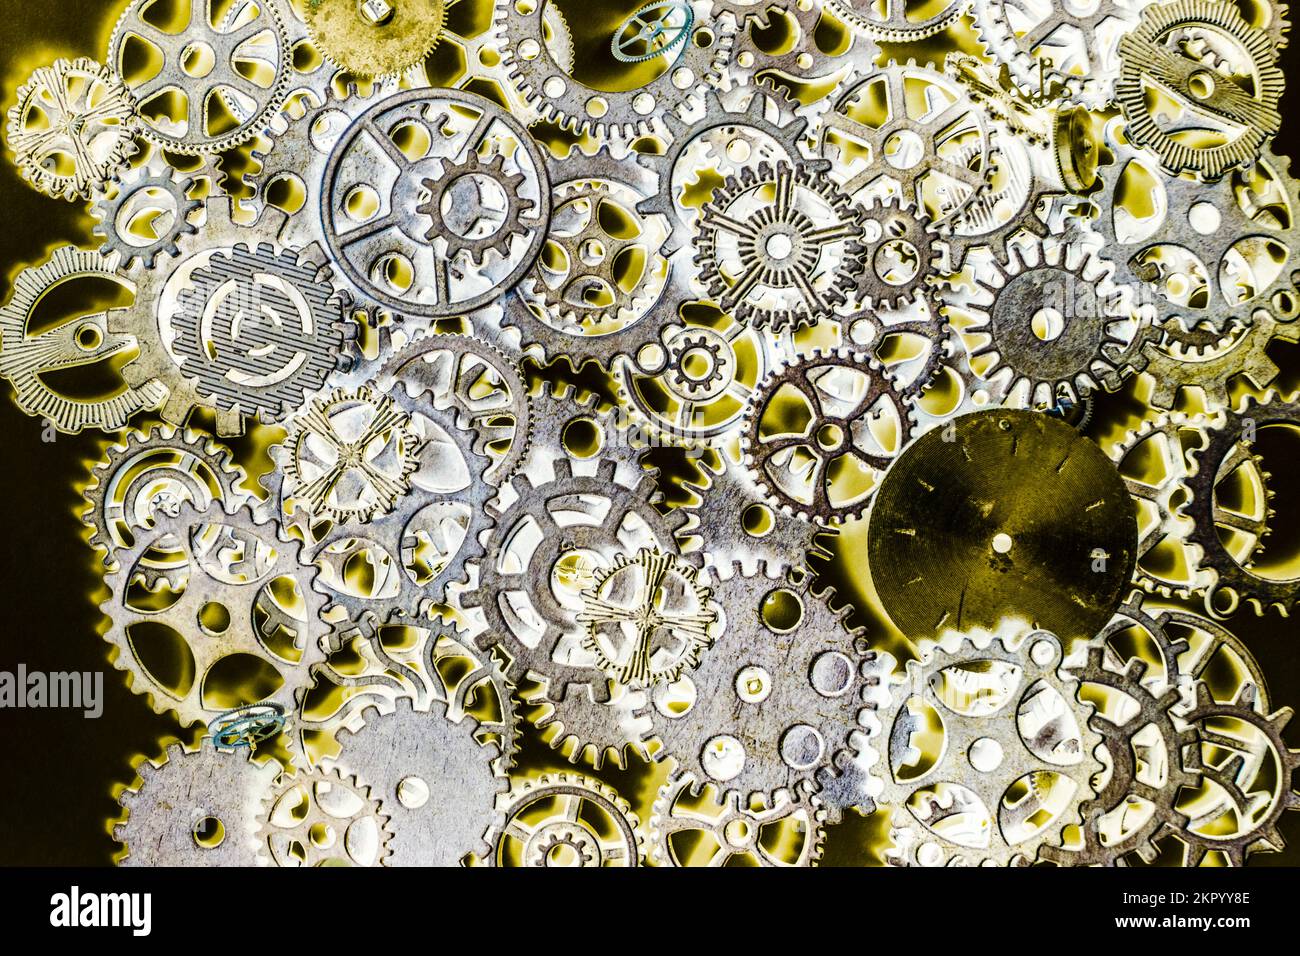 Creative machinery artwork on metallic motor mechanisms from an industrial past Stock Photo